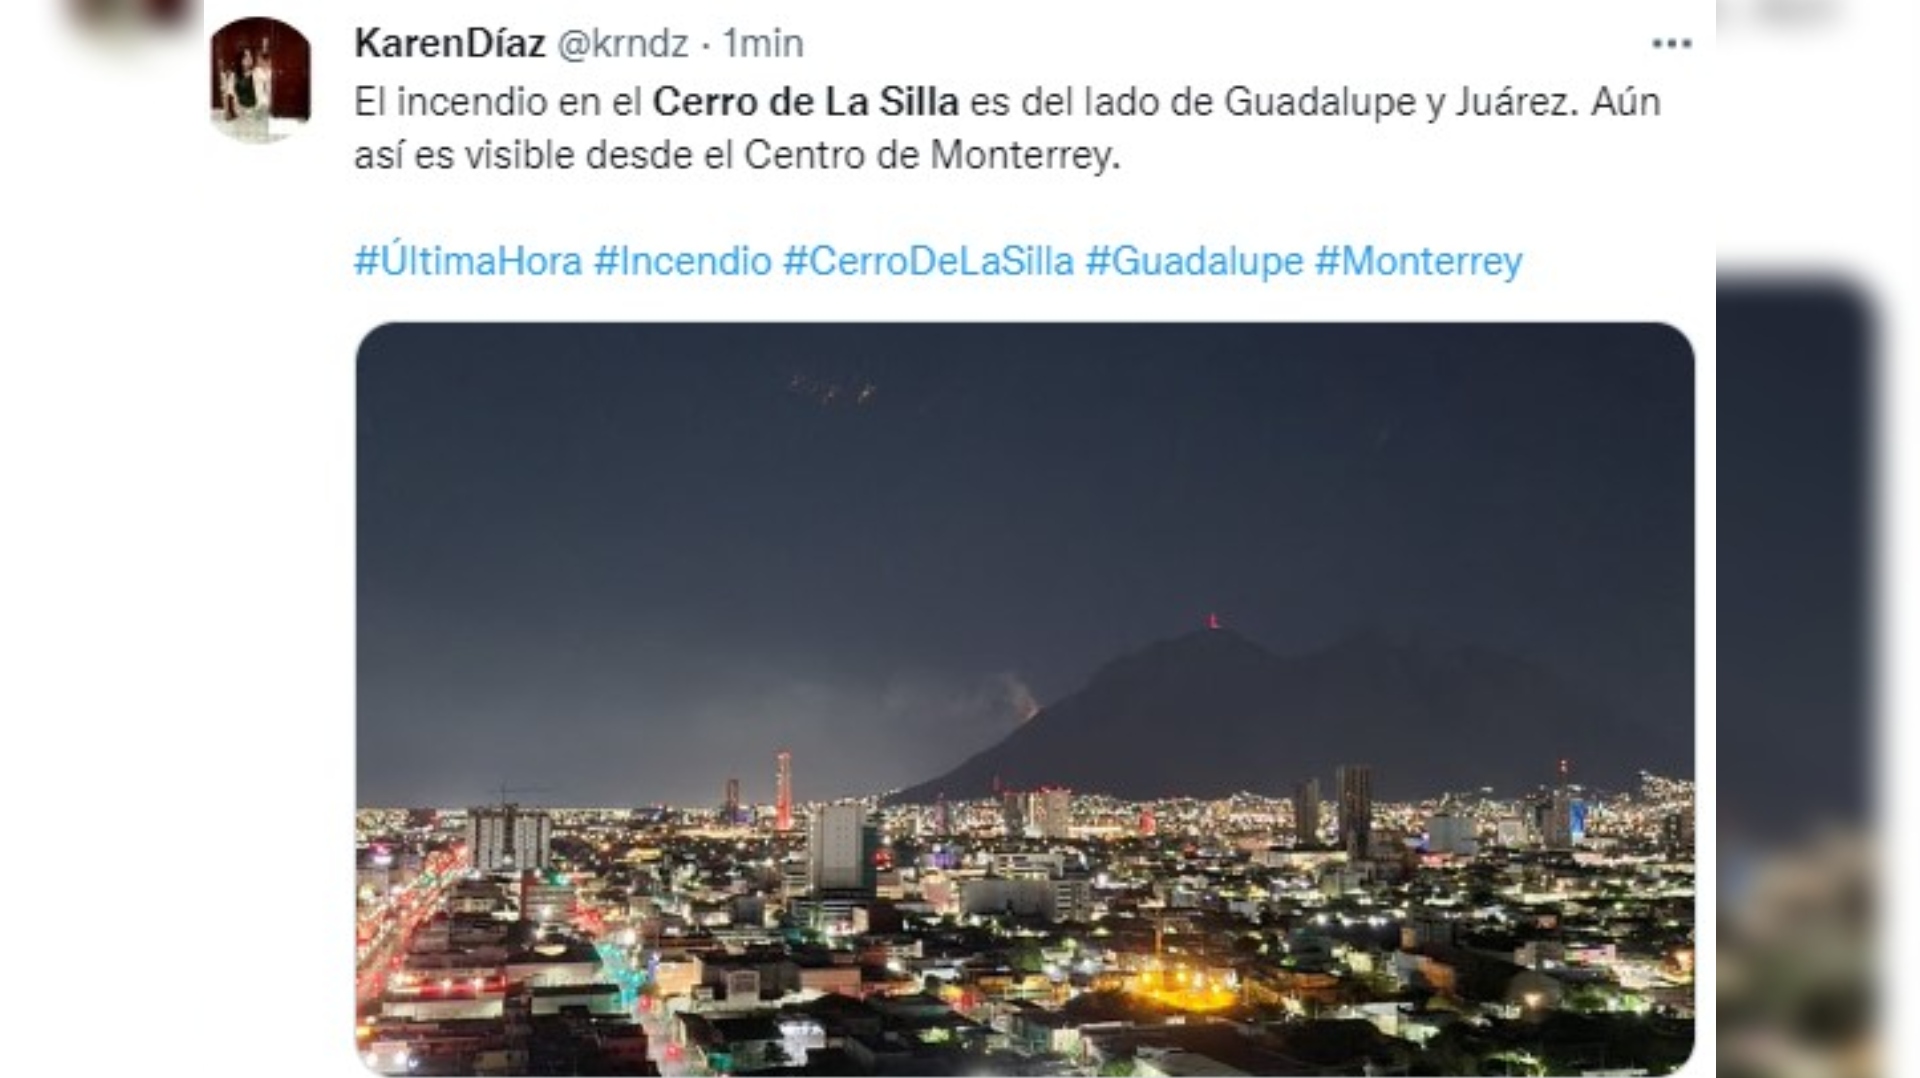 Users commented that the incident was also visible from the center of Monterrey.  (Capture: Twitter/@krndz)